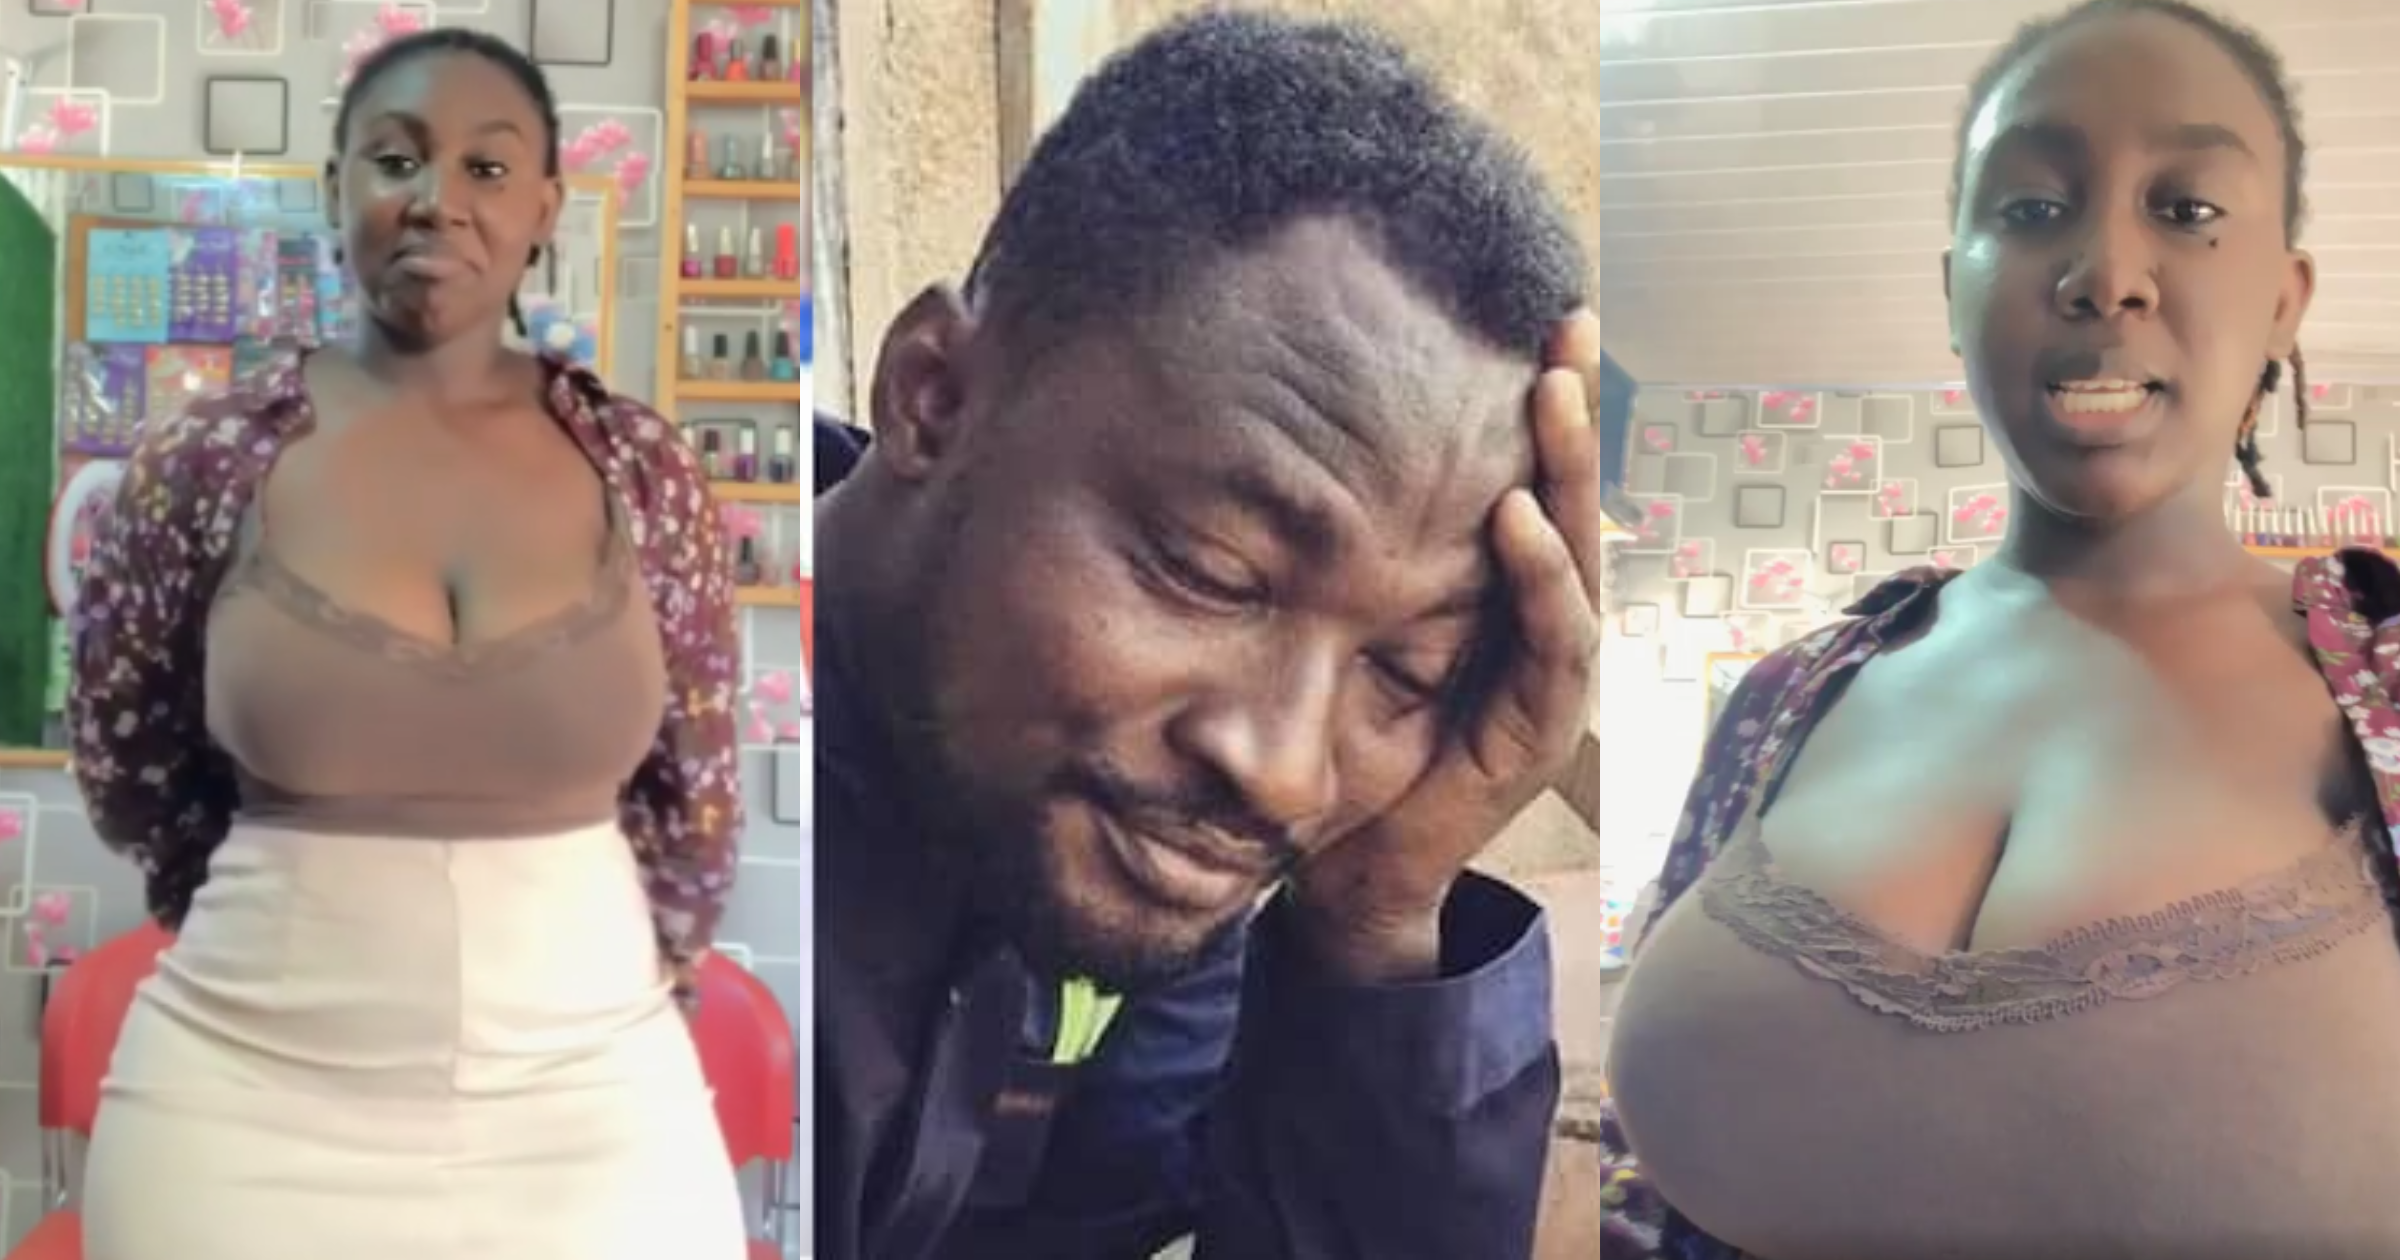 Funny Face's babymama started dating another man while she was 8 months pregnant for comedian, details drop in video